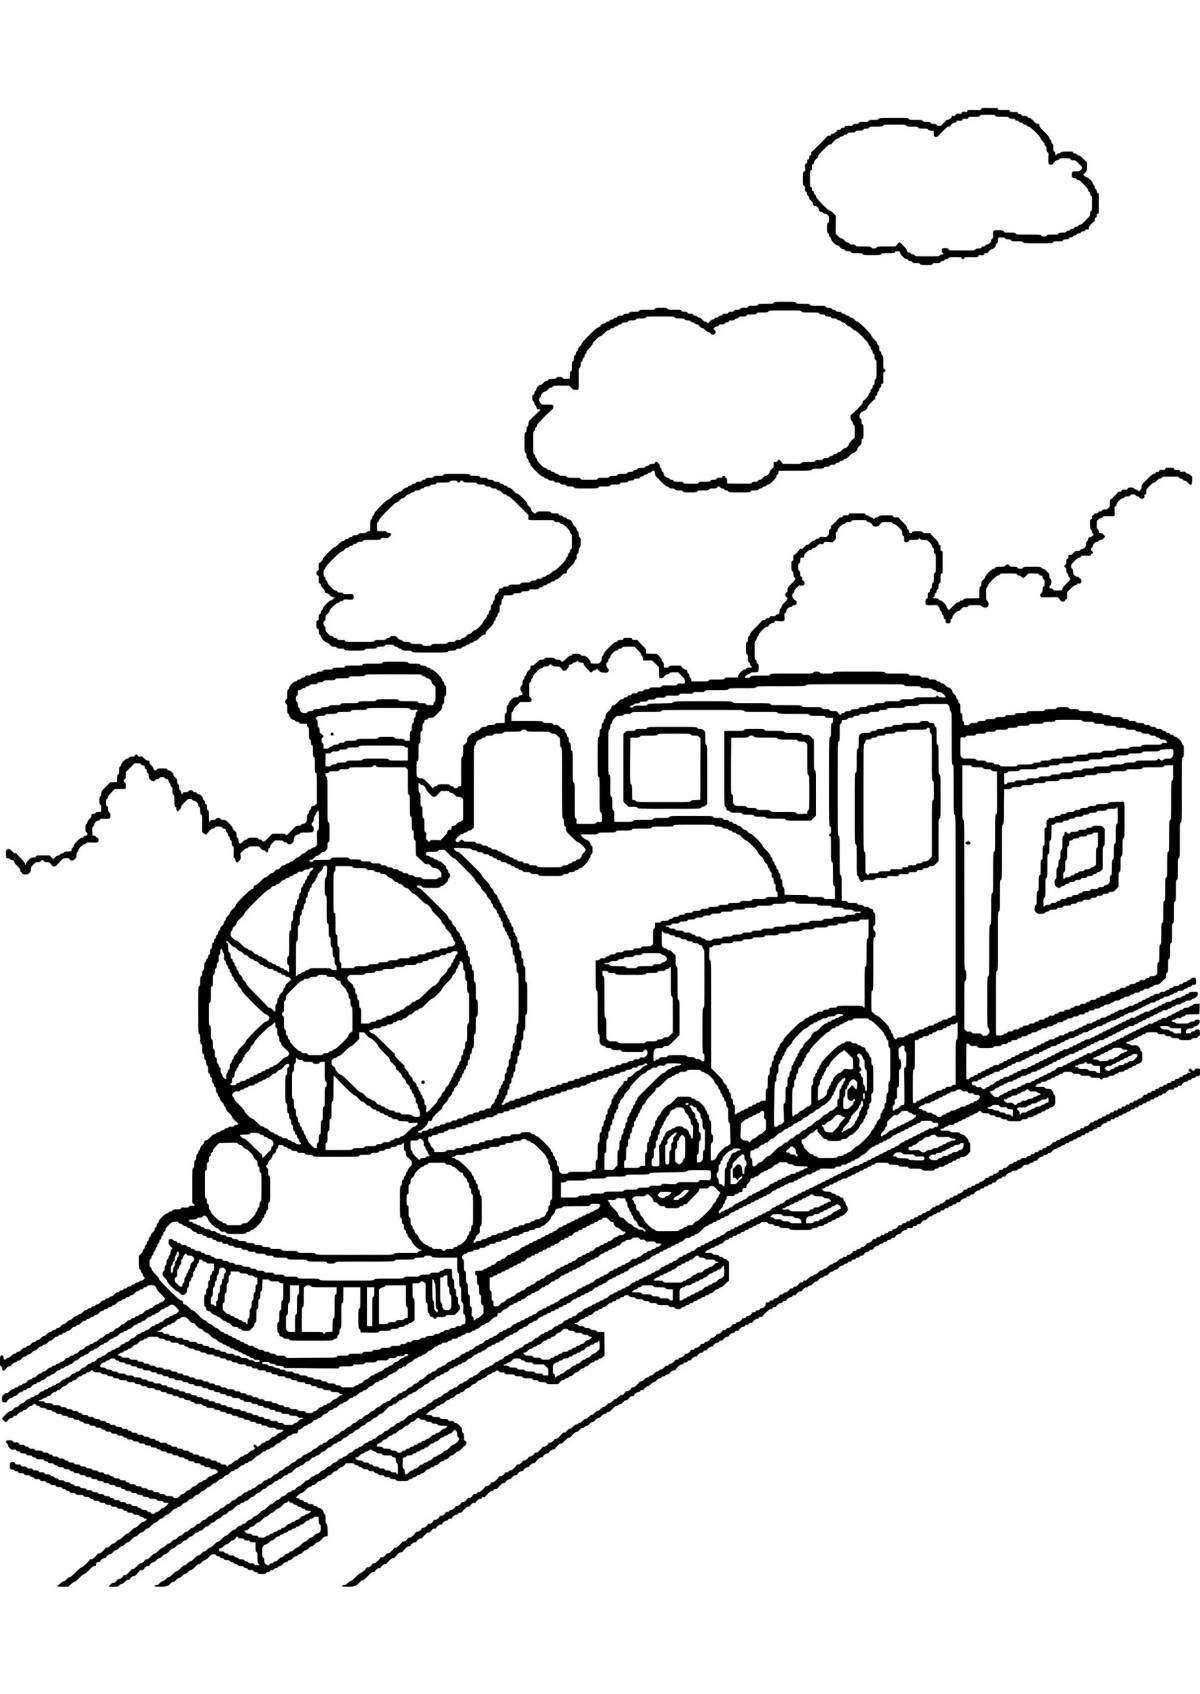 Coloring book funny train for kids